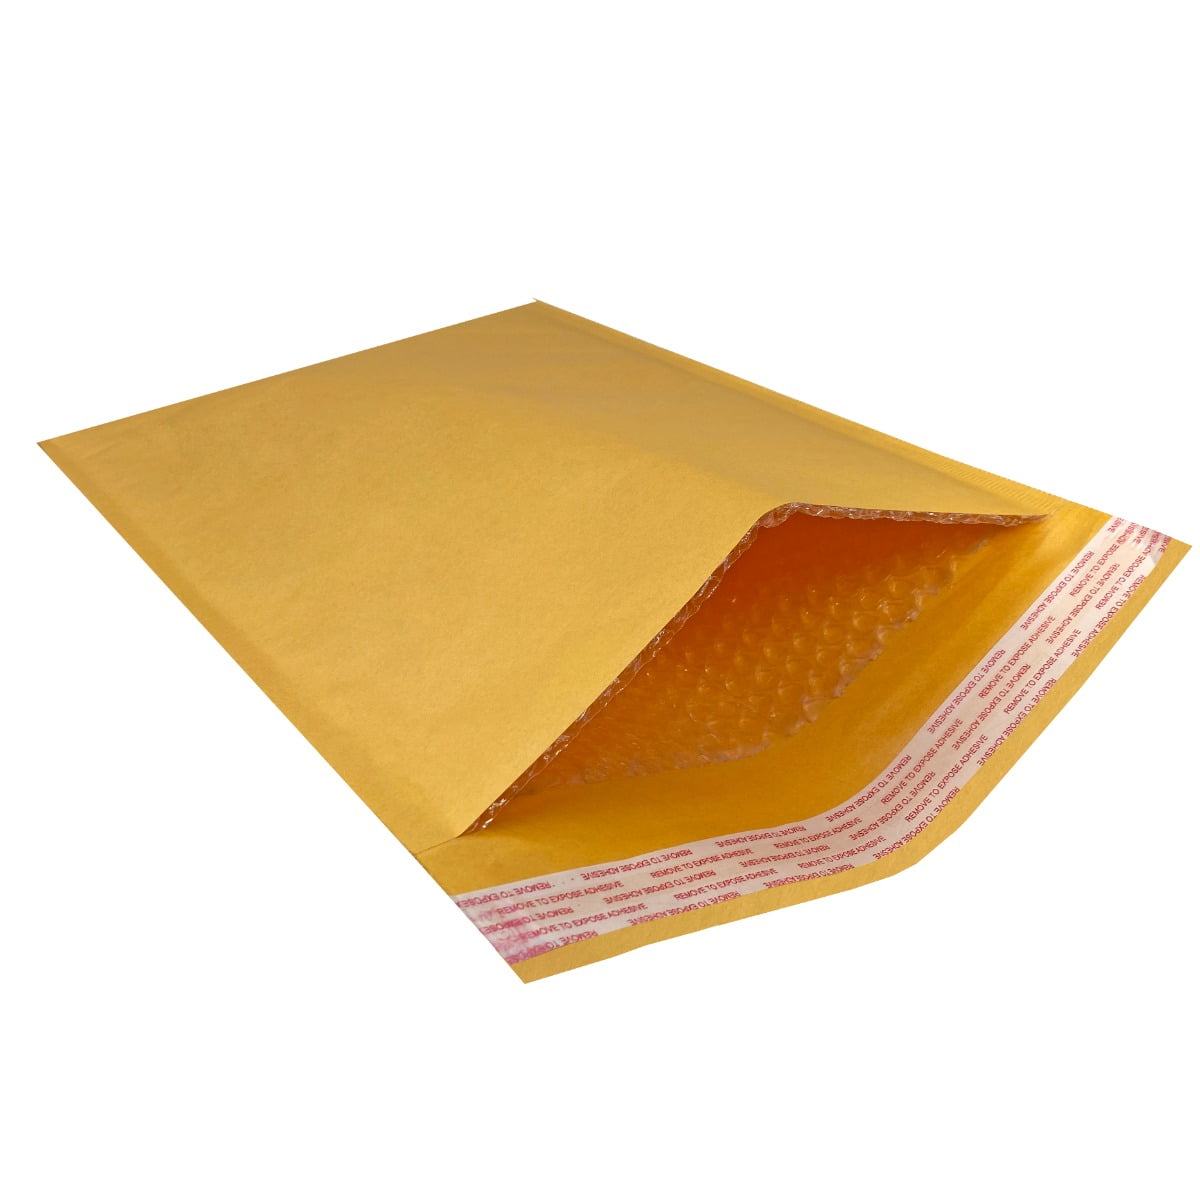 ANY SIZE KRAFT BUBBLE MAILERS SHIPPING MAILING PADDED BAGS ENVELOPES SELF-SEAL 